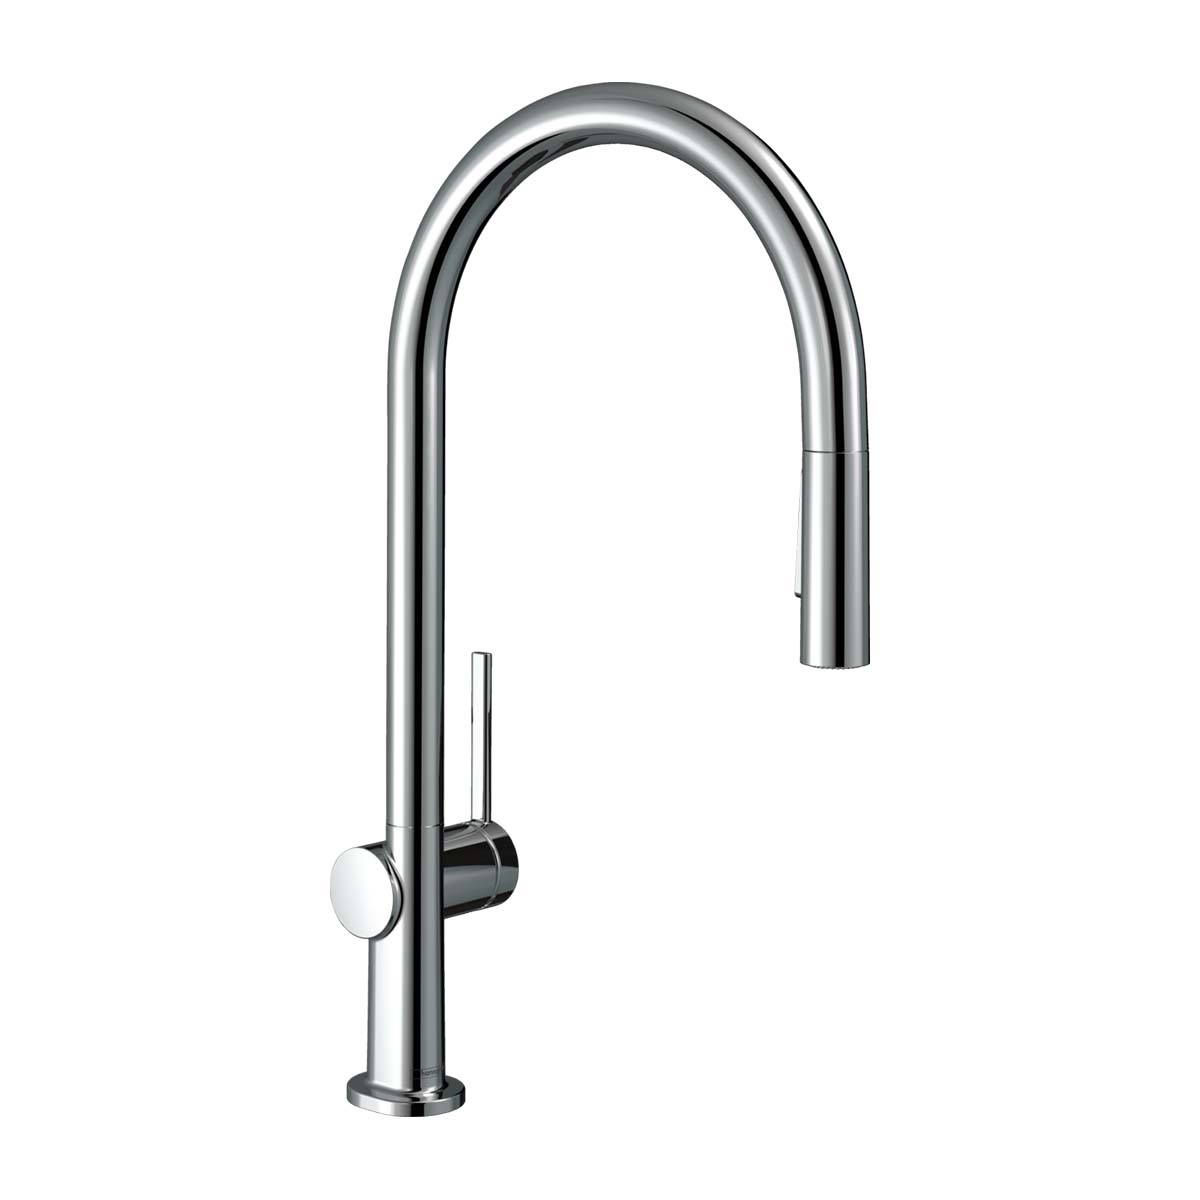 Hansgrohe Talis M54 single lever kitchen mixer 220 with pull out spray chrome